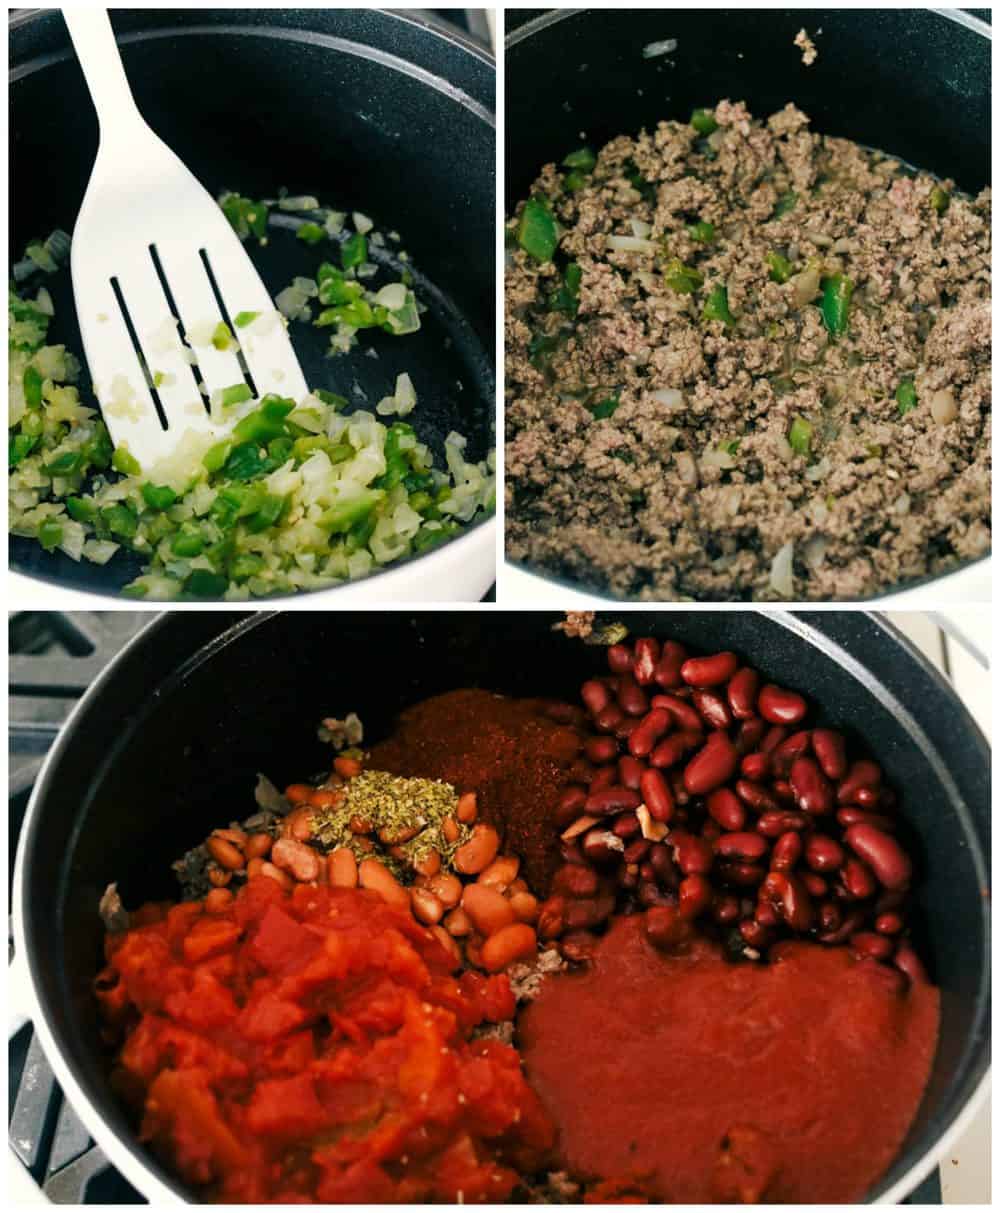 3 pictures that show how to make chili by sautéing the onions and green peppers, cooking the ground beef and adding the beans, tomatoes and seasonings into the pot to simmer.